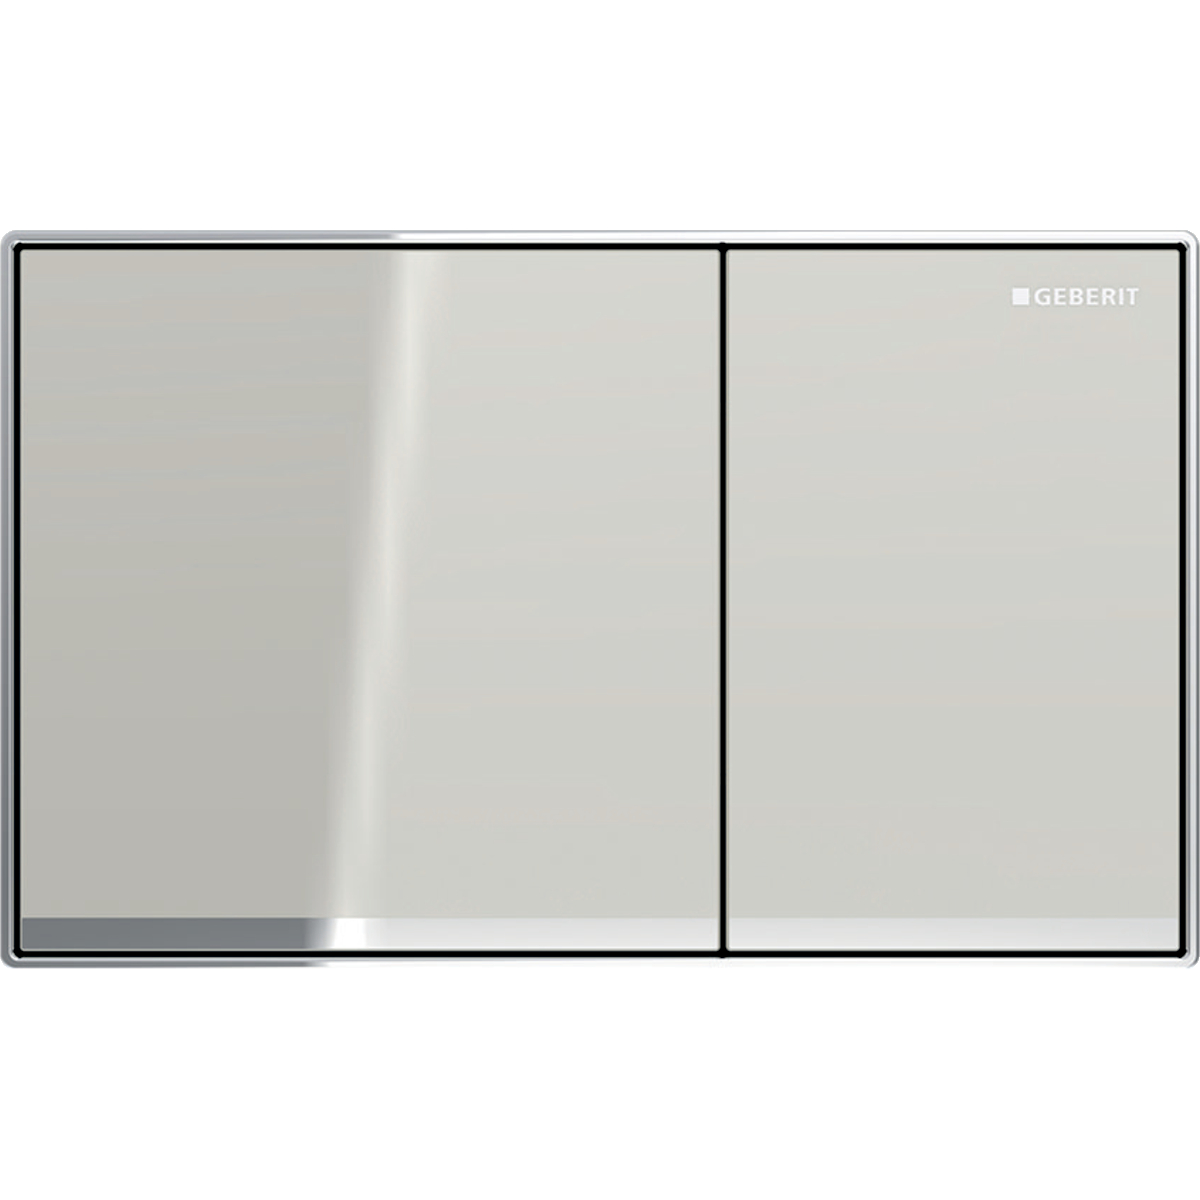 Geberit 115.640.JL.1 Actuator Plate Sigma60 for Dual Flush, Surface-Even: Sand Grey, Mirrored - Bright Chrome-Plated